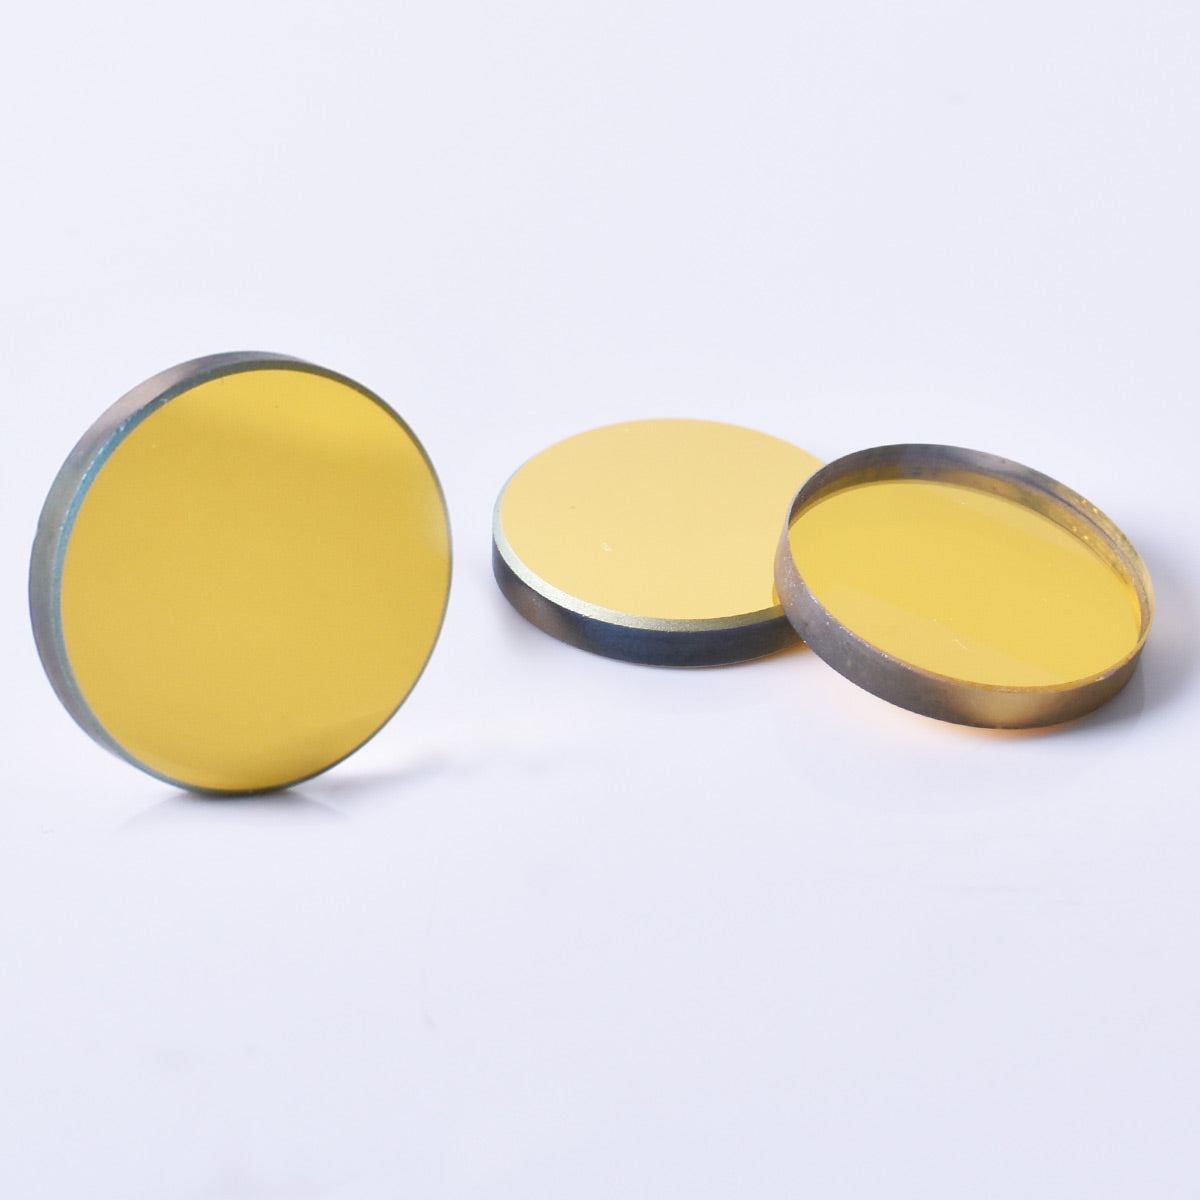 Startnow 20mm K9 Glass CO2 Laser Reflective Mirrors With Gold-Plated Reflector Lens